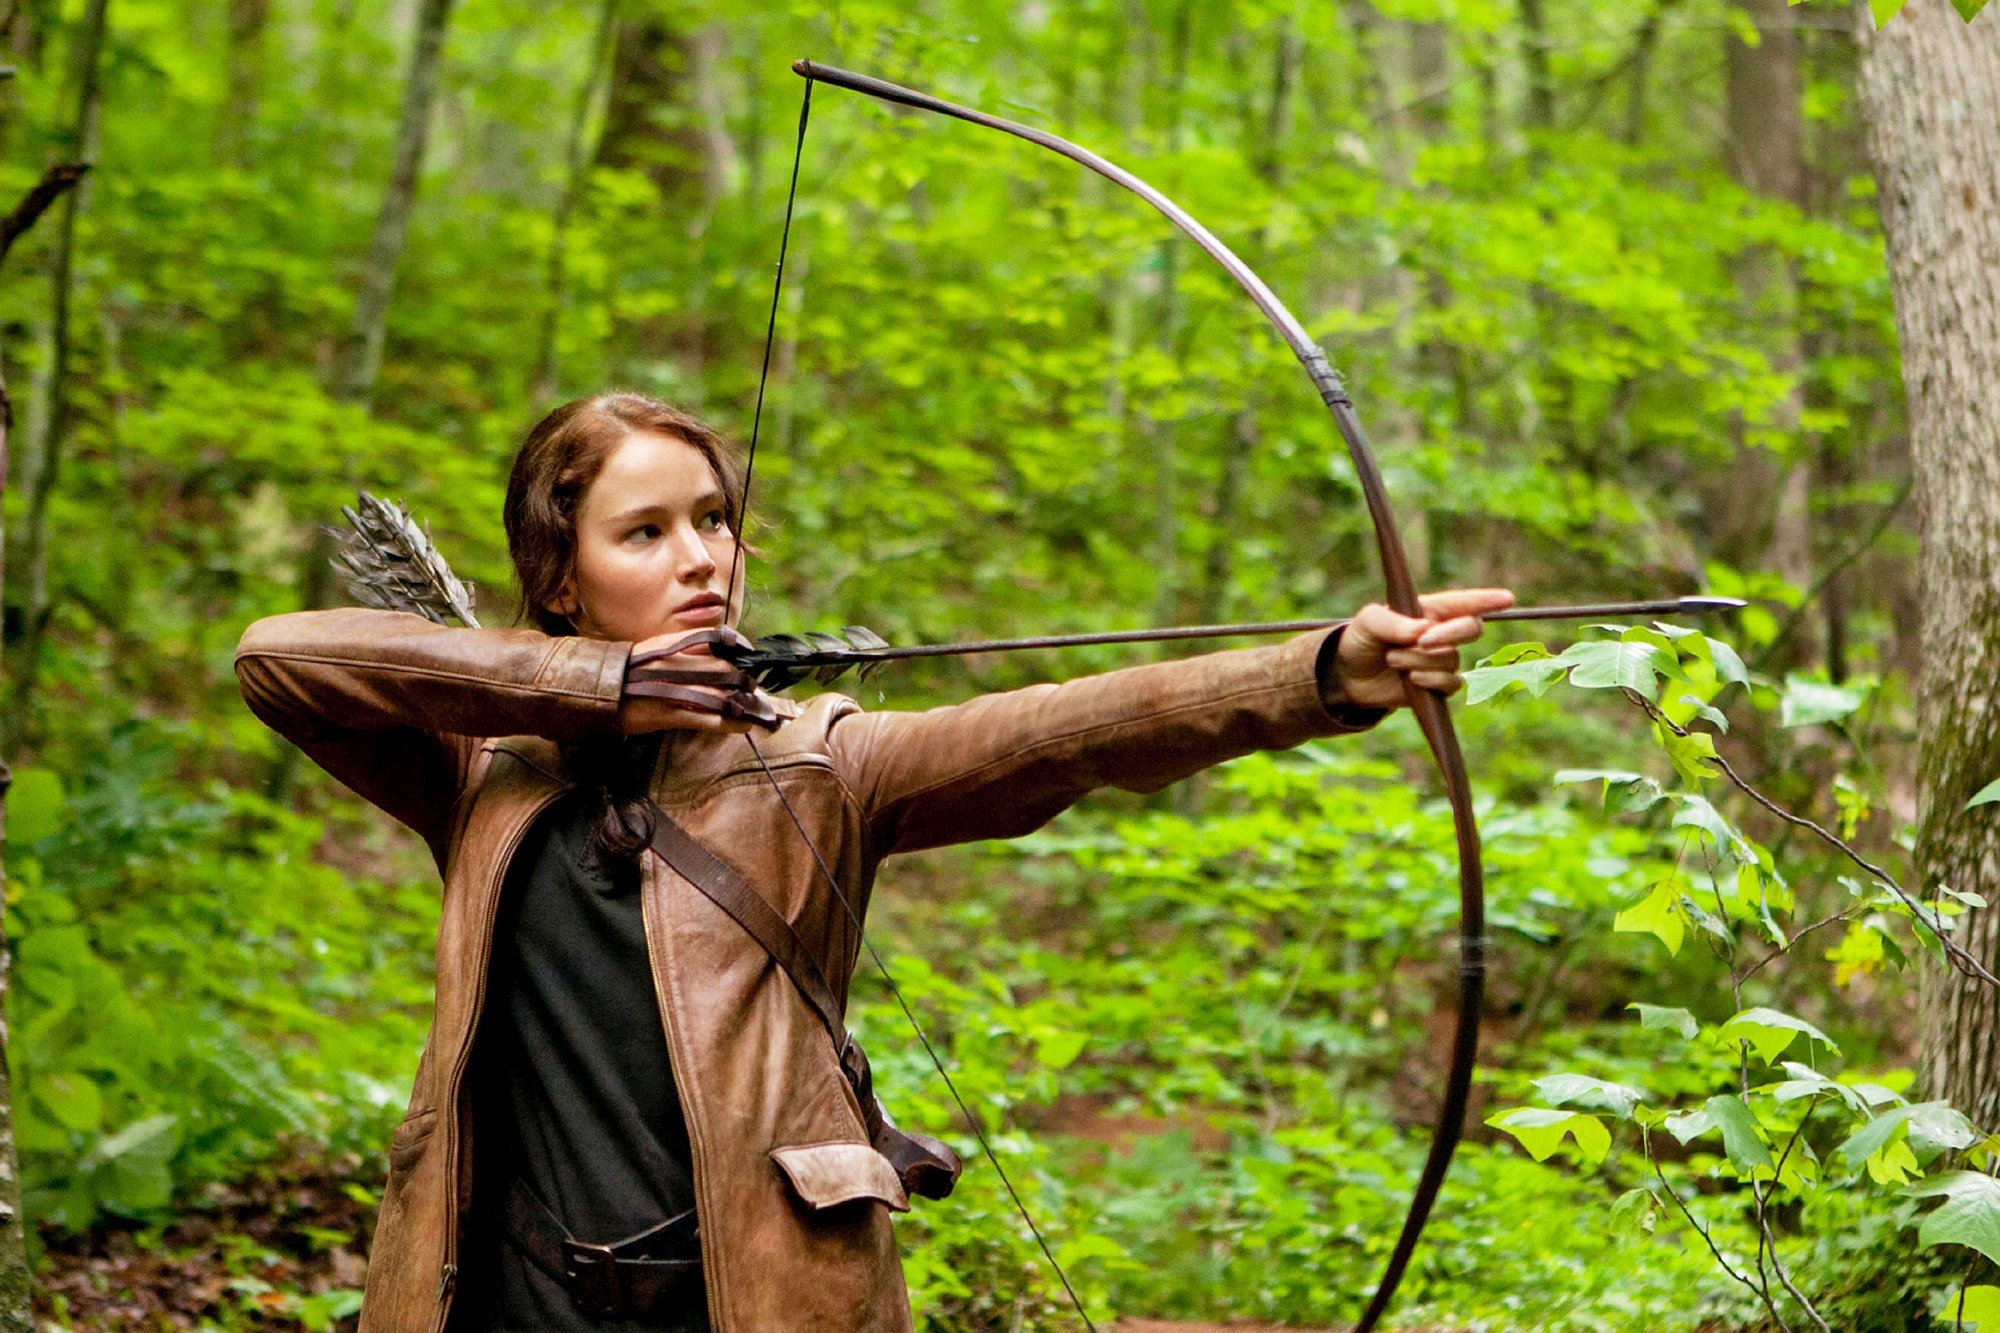 “The Hunger Games: Class, Politics and Marketing”